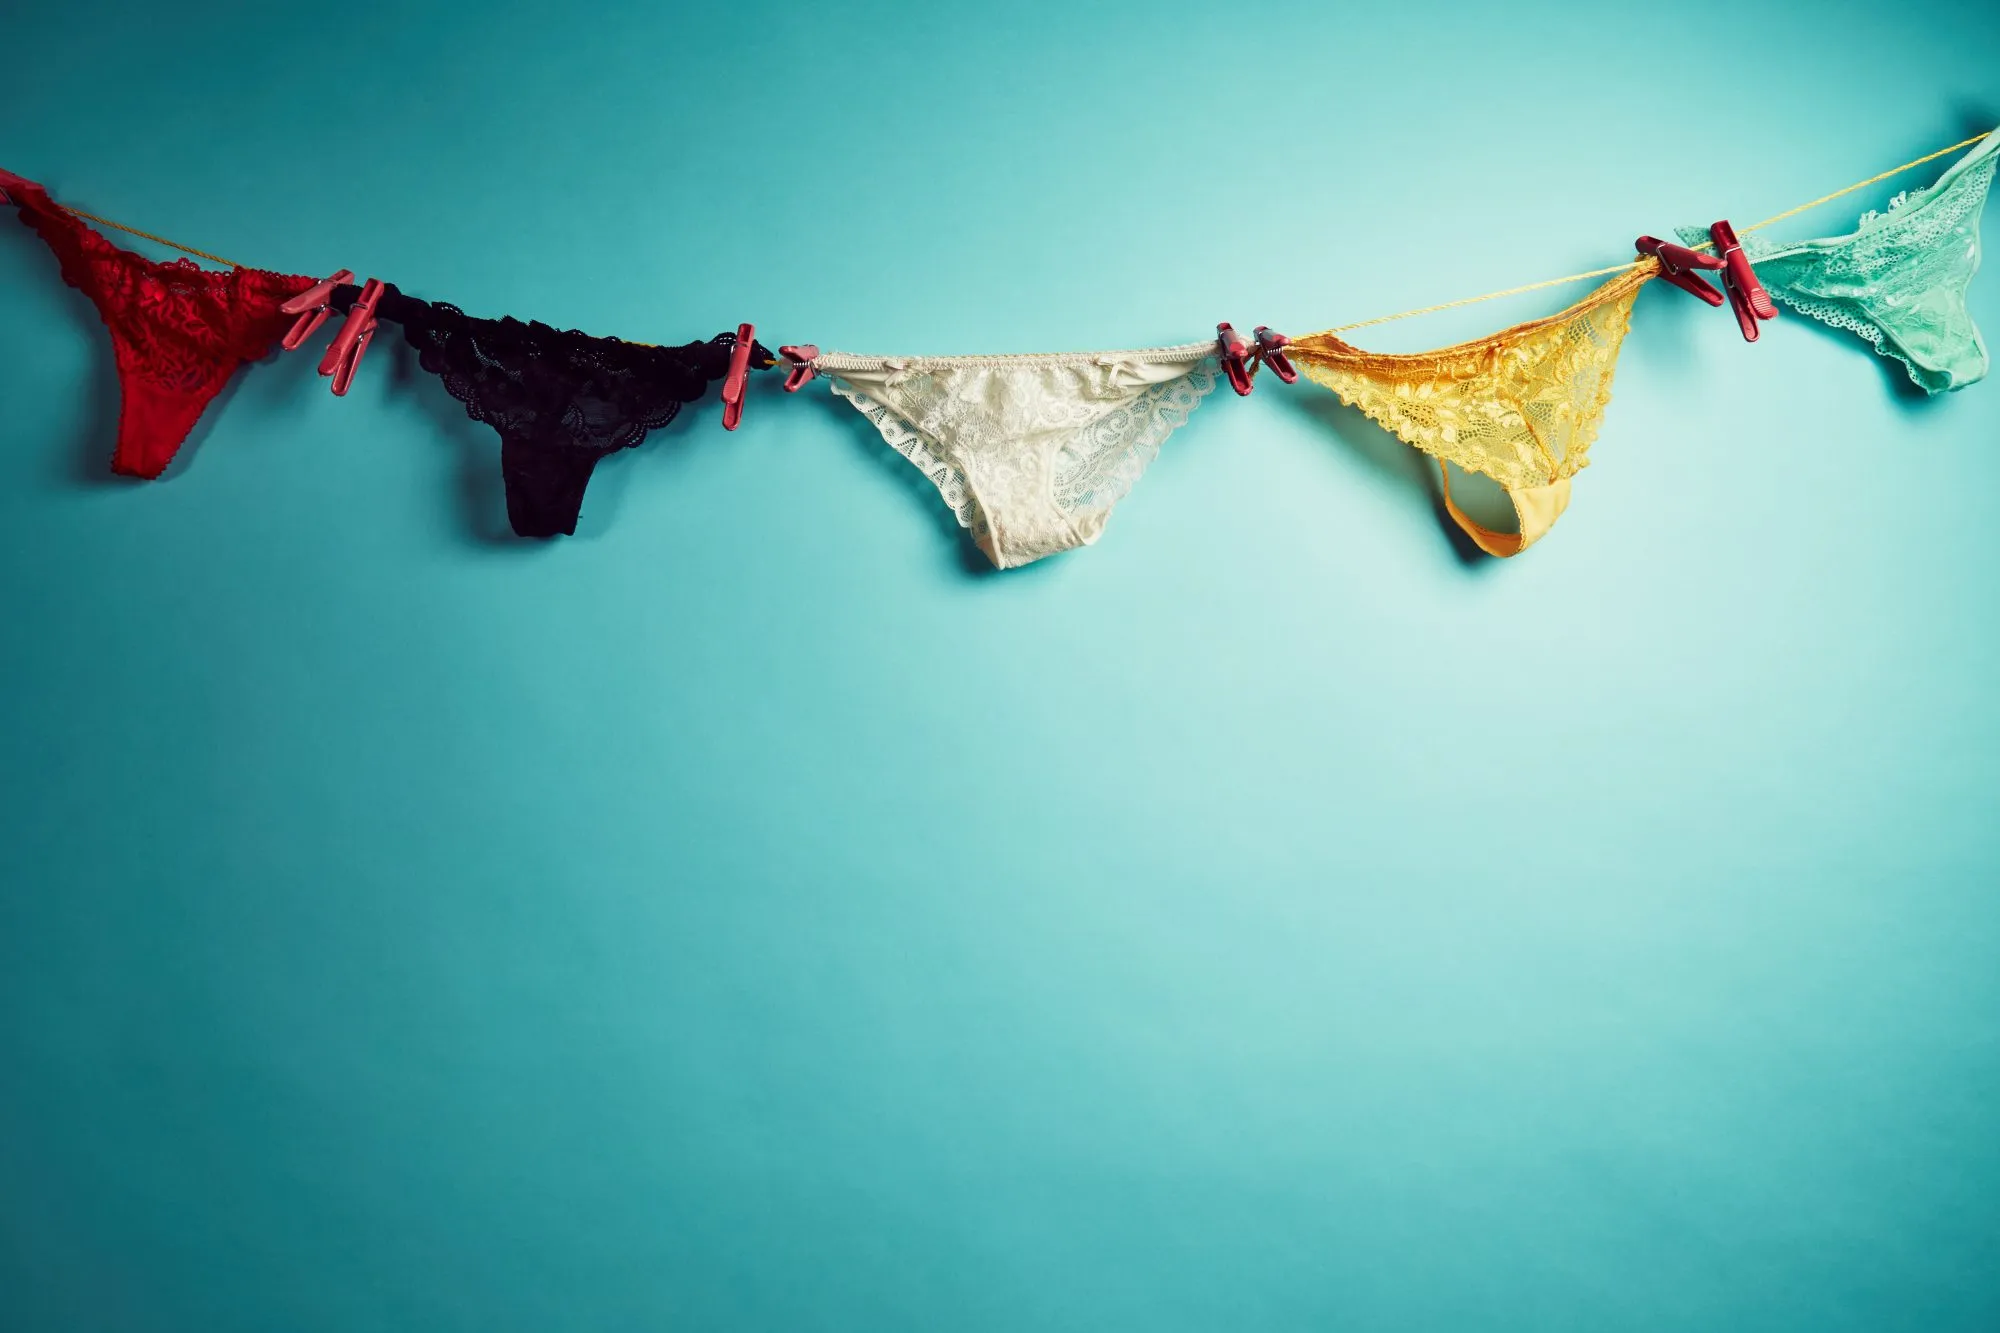 I was selling my dirty undies before Orange Is the New Black made it 'cool